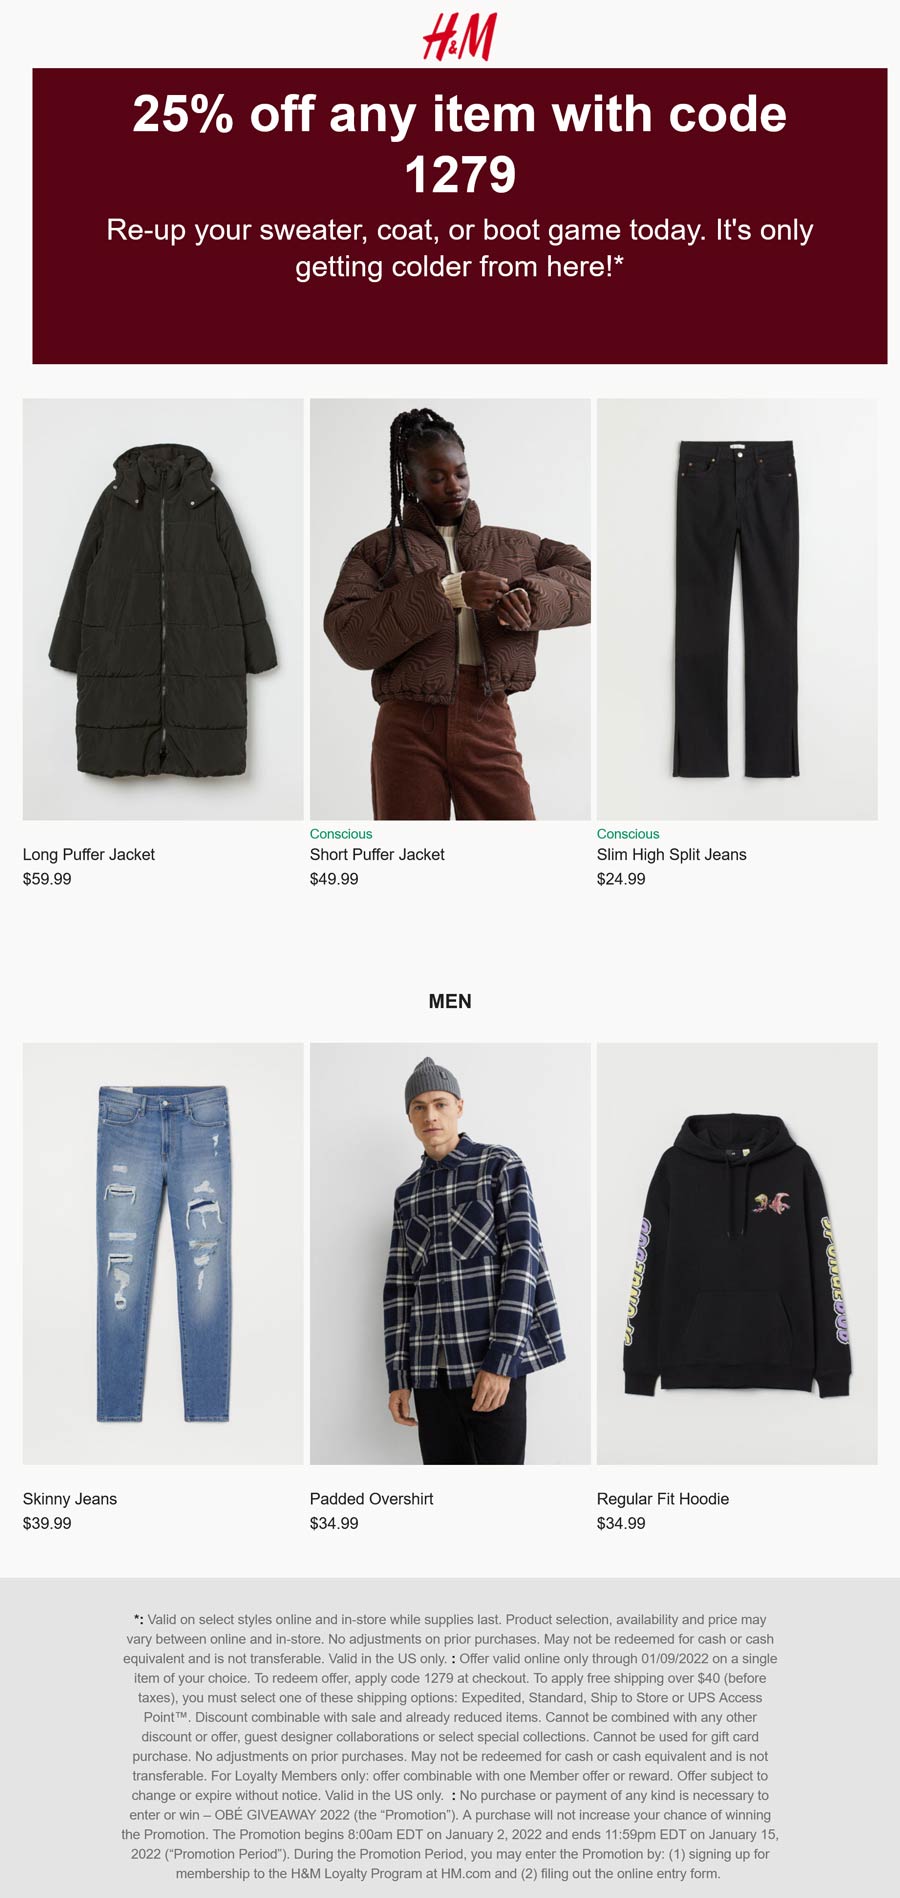 H&M stores Coupon  25% off a single item today at H&M via promo code 1279 #hm 